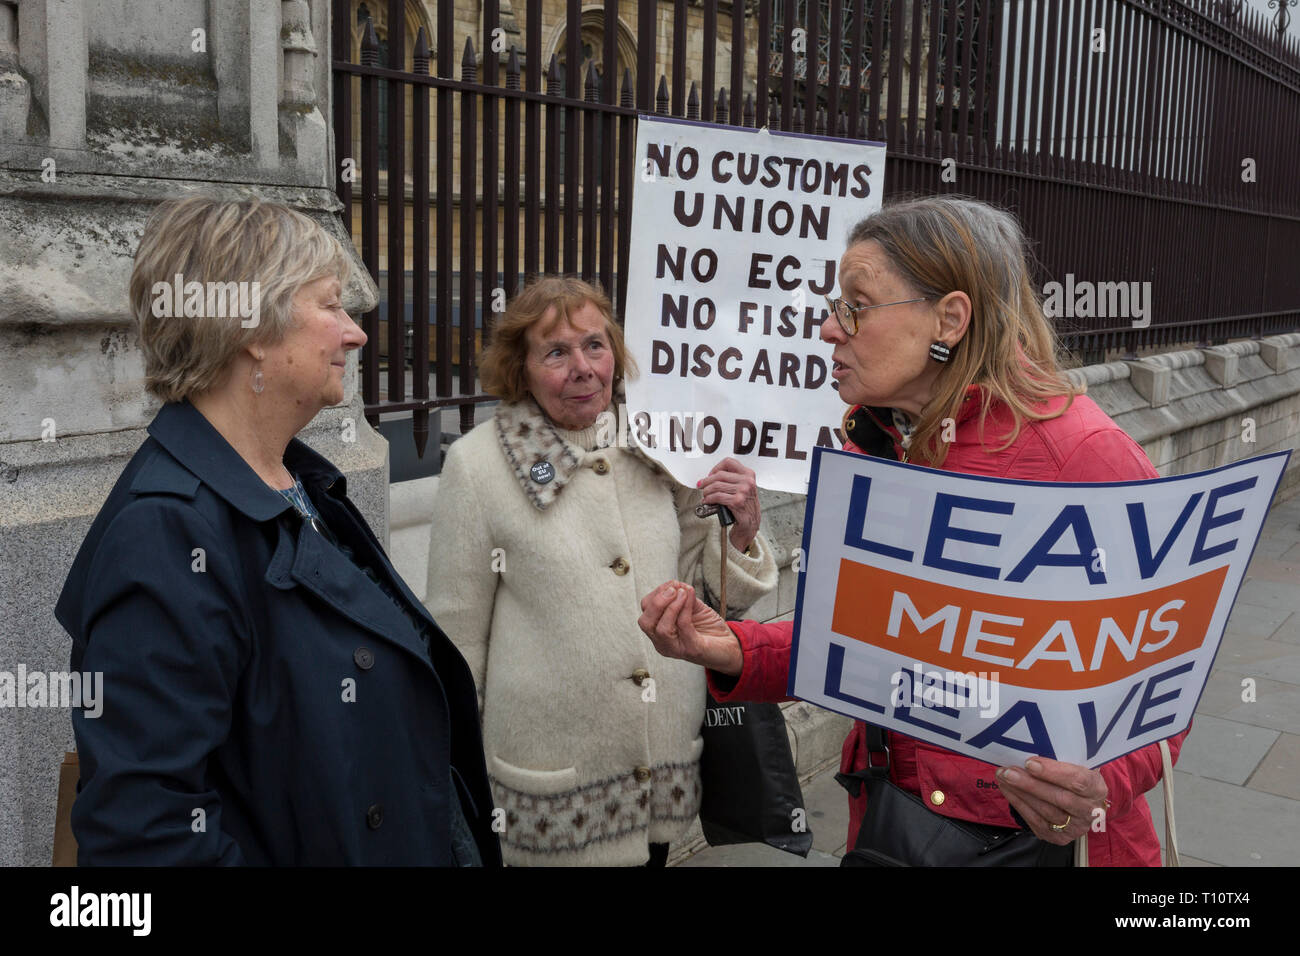 A day after Commons Speaker John Bercow announced his refusal to accept Prime Minster Theresa May's third Brexit Meaningful Vote, Leave Means Leaves Brexiteers protest outside the gates of parliament, on 19th March 2019, in London, England. Stock Photo